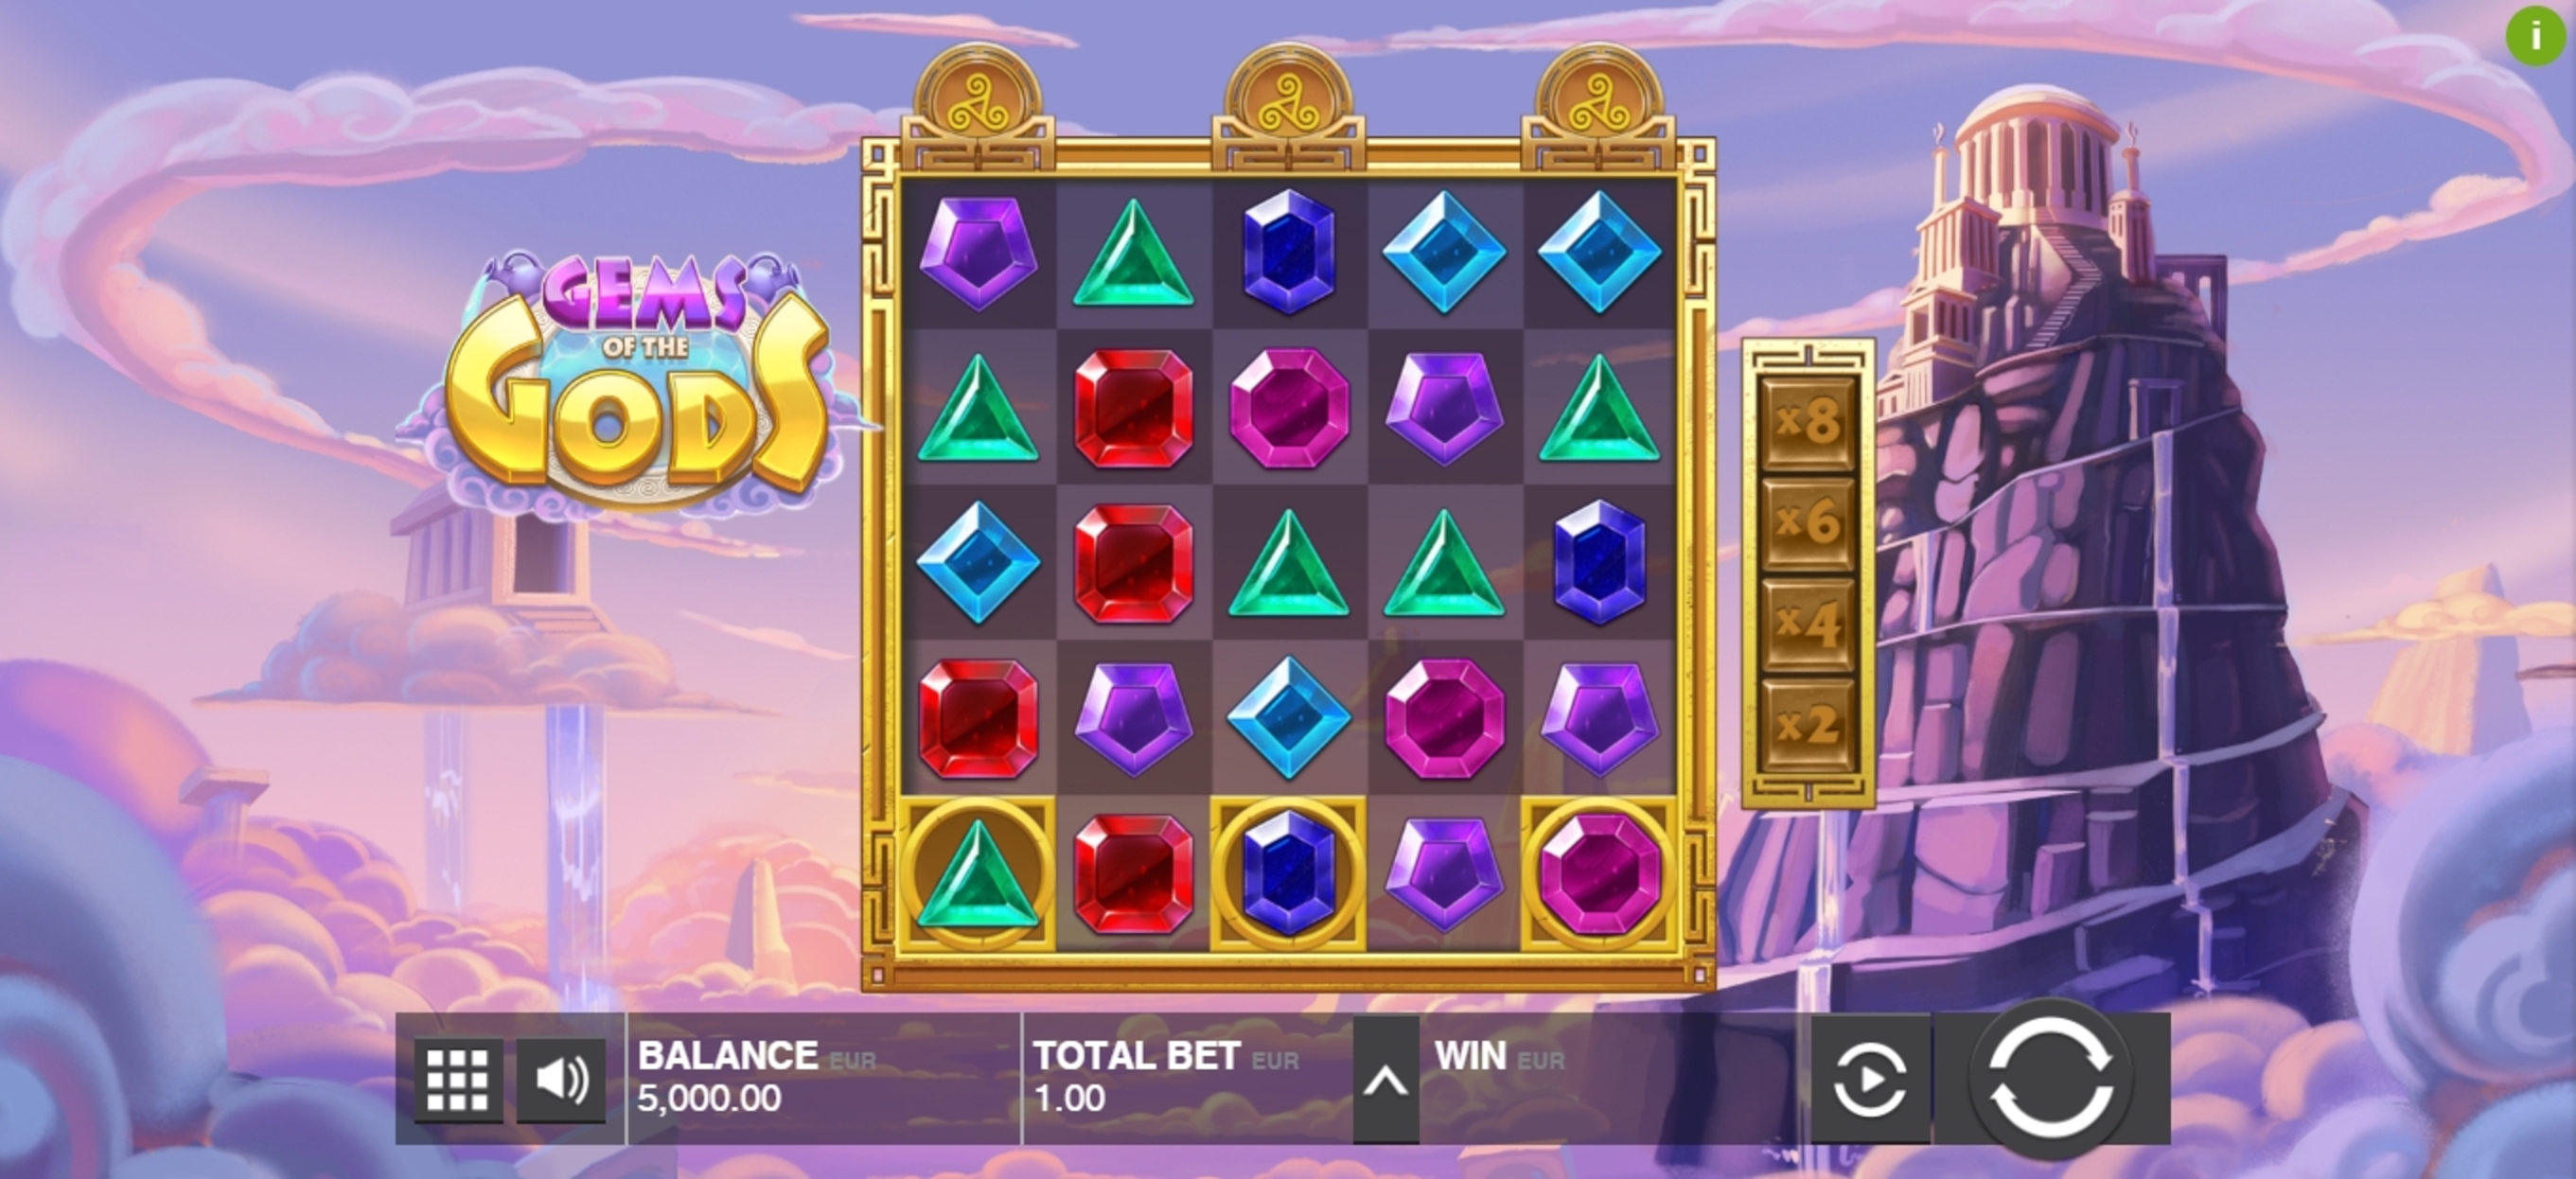 Reels in Gems of the Gods Slot Game by Push Gaming